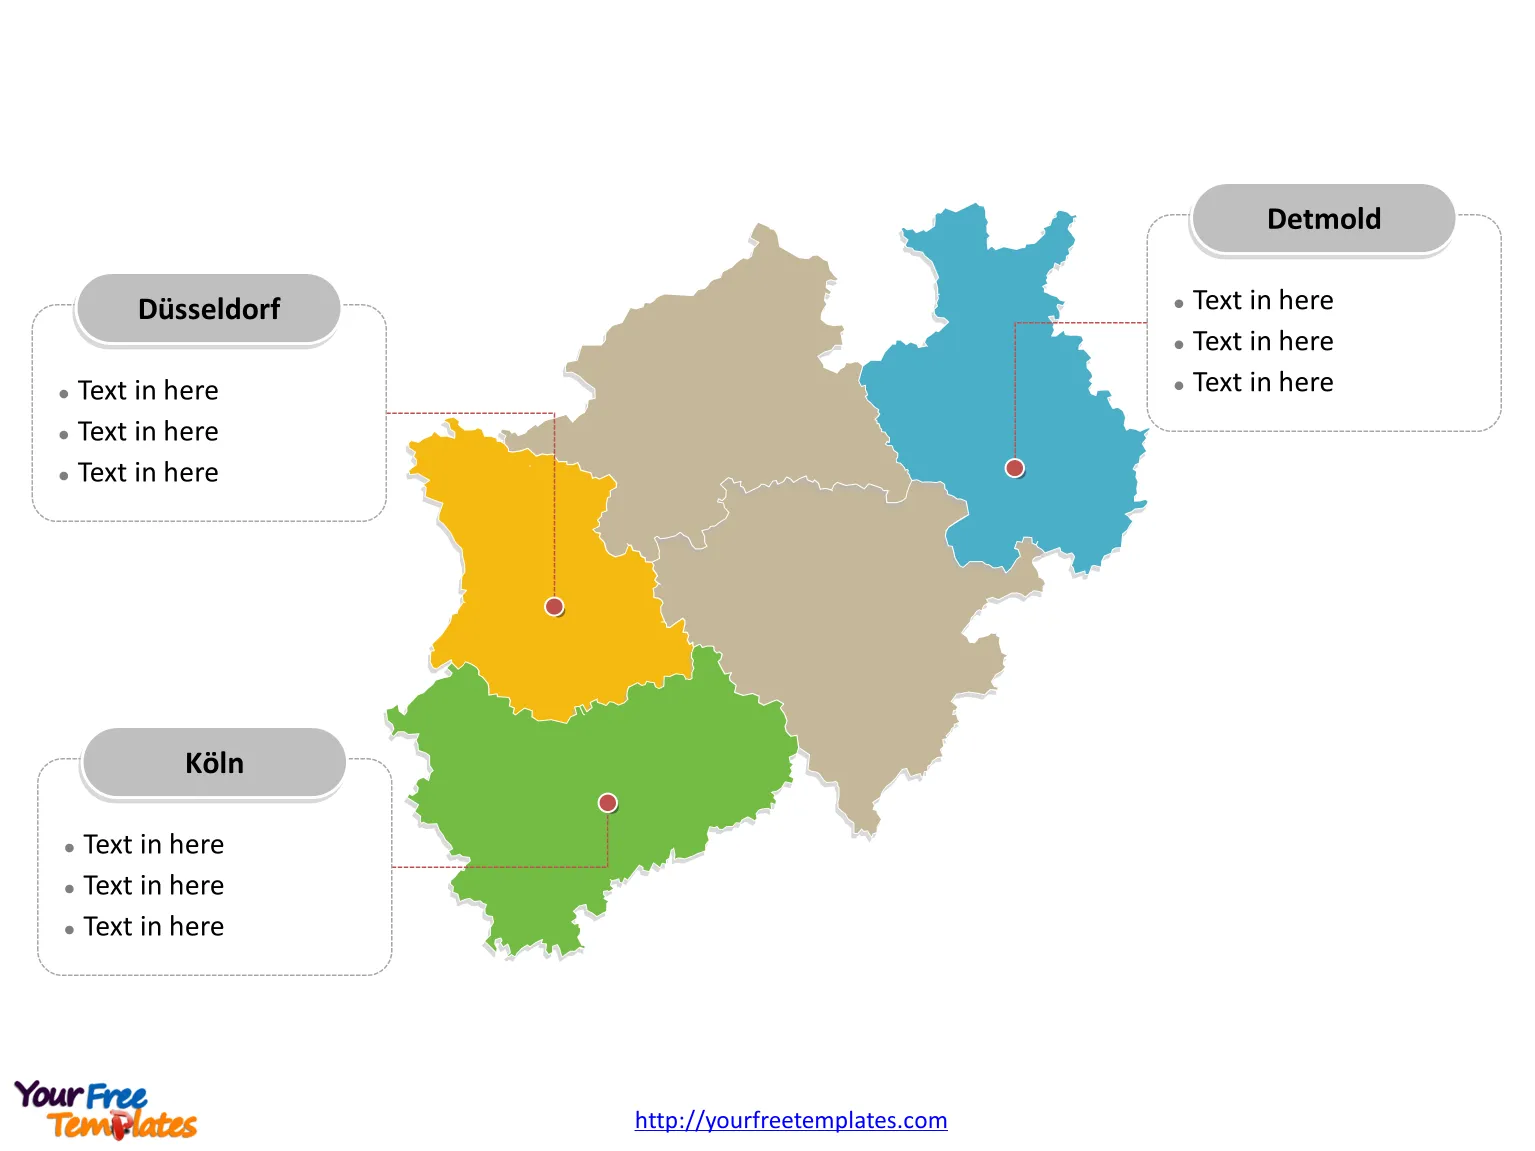 North Rhine-Westphalia map PowerPoint templates labeled with major political regions